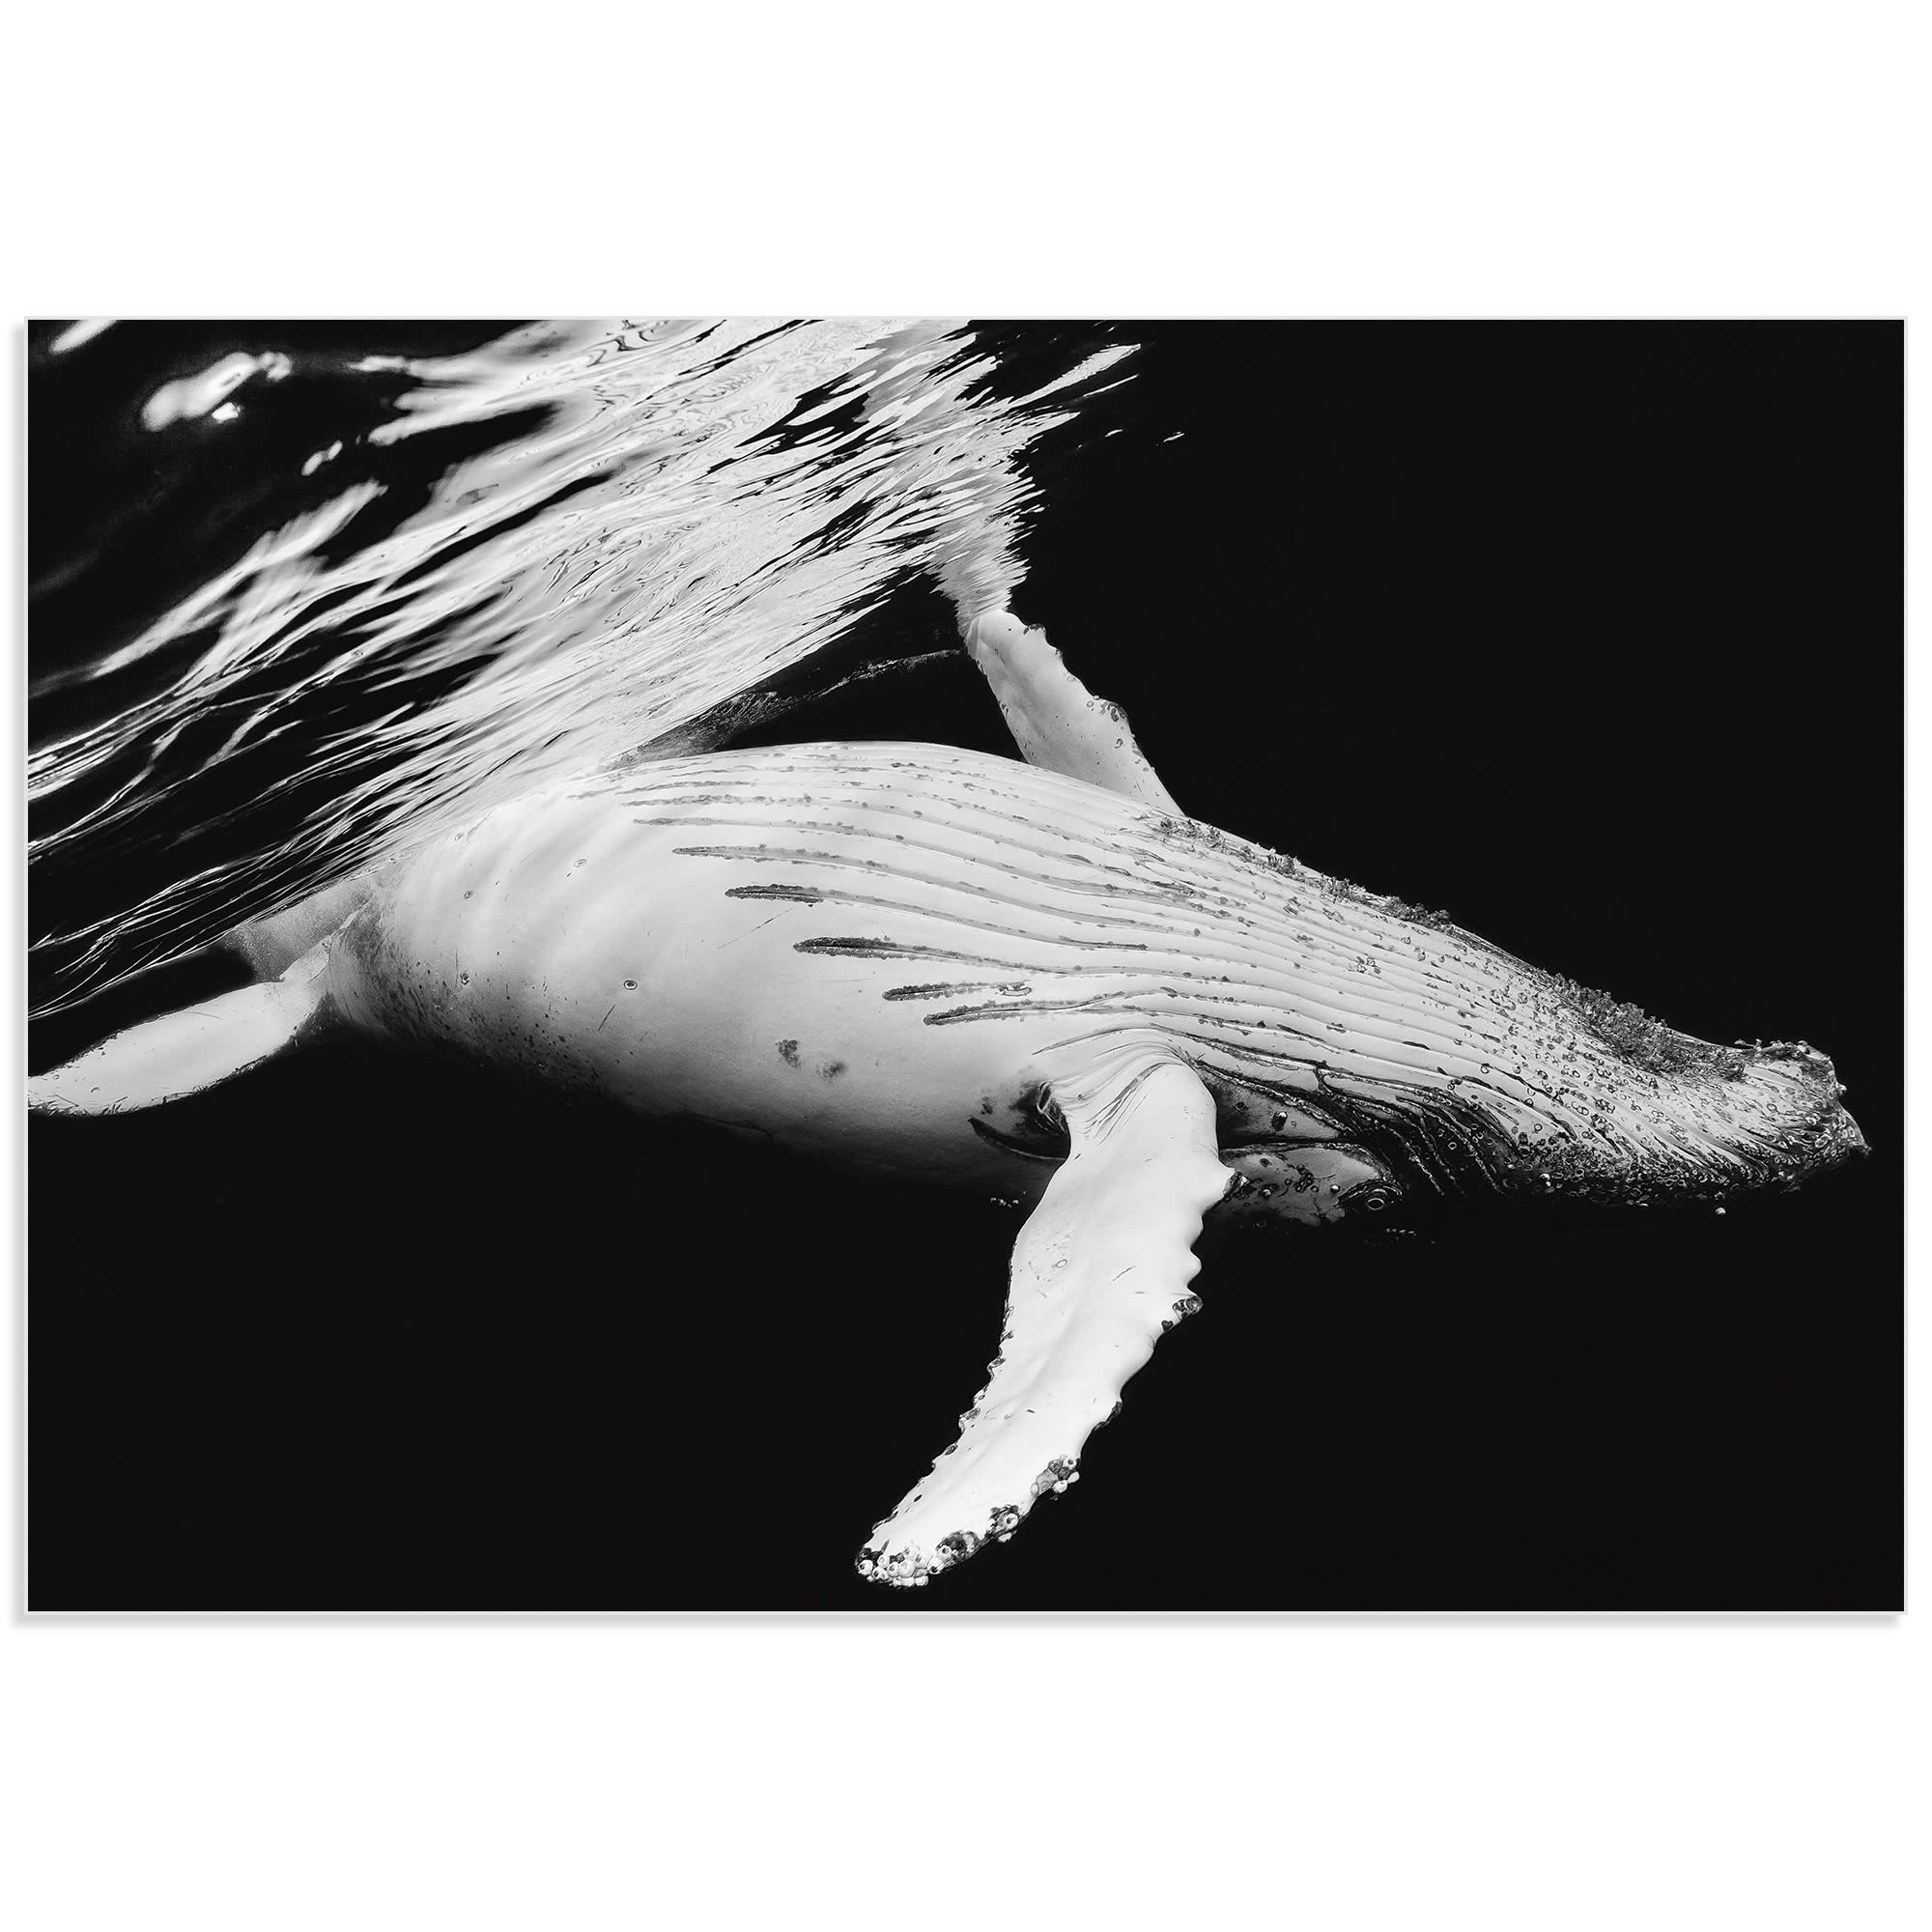 Black and White Whale by Barathieu Gabriel - Contemporary Whale Art on Metal or Acrylic - Alternate View 2